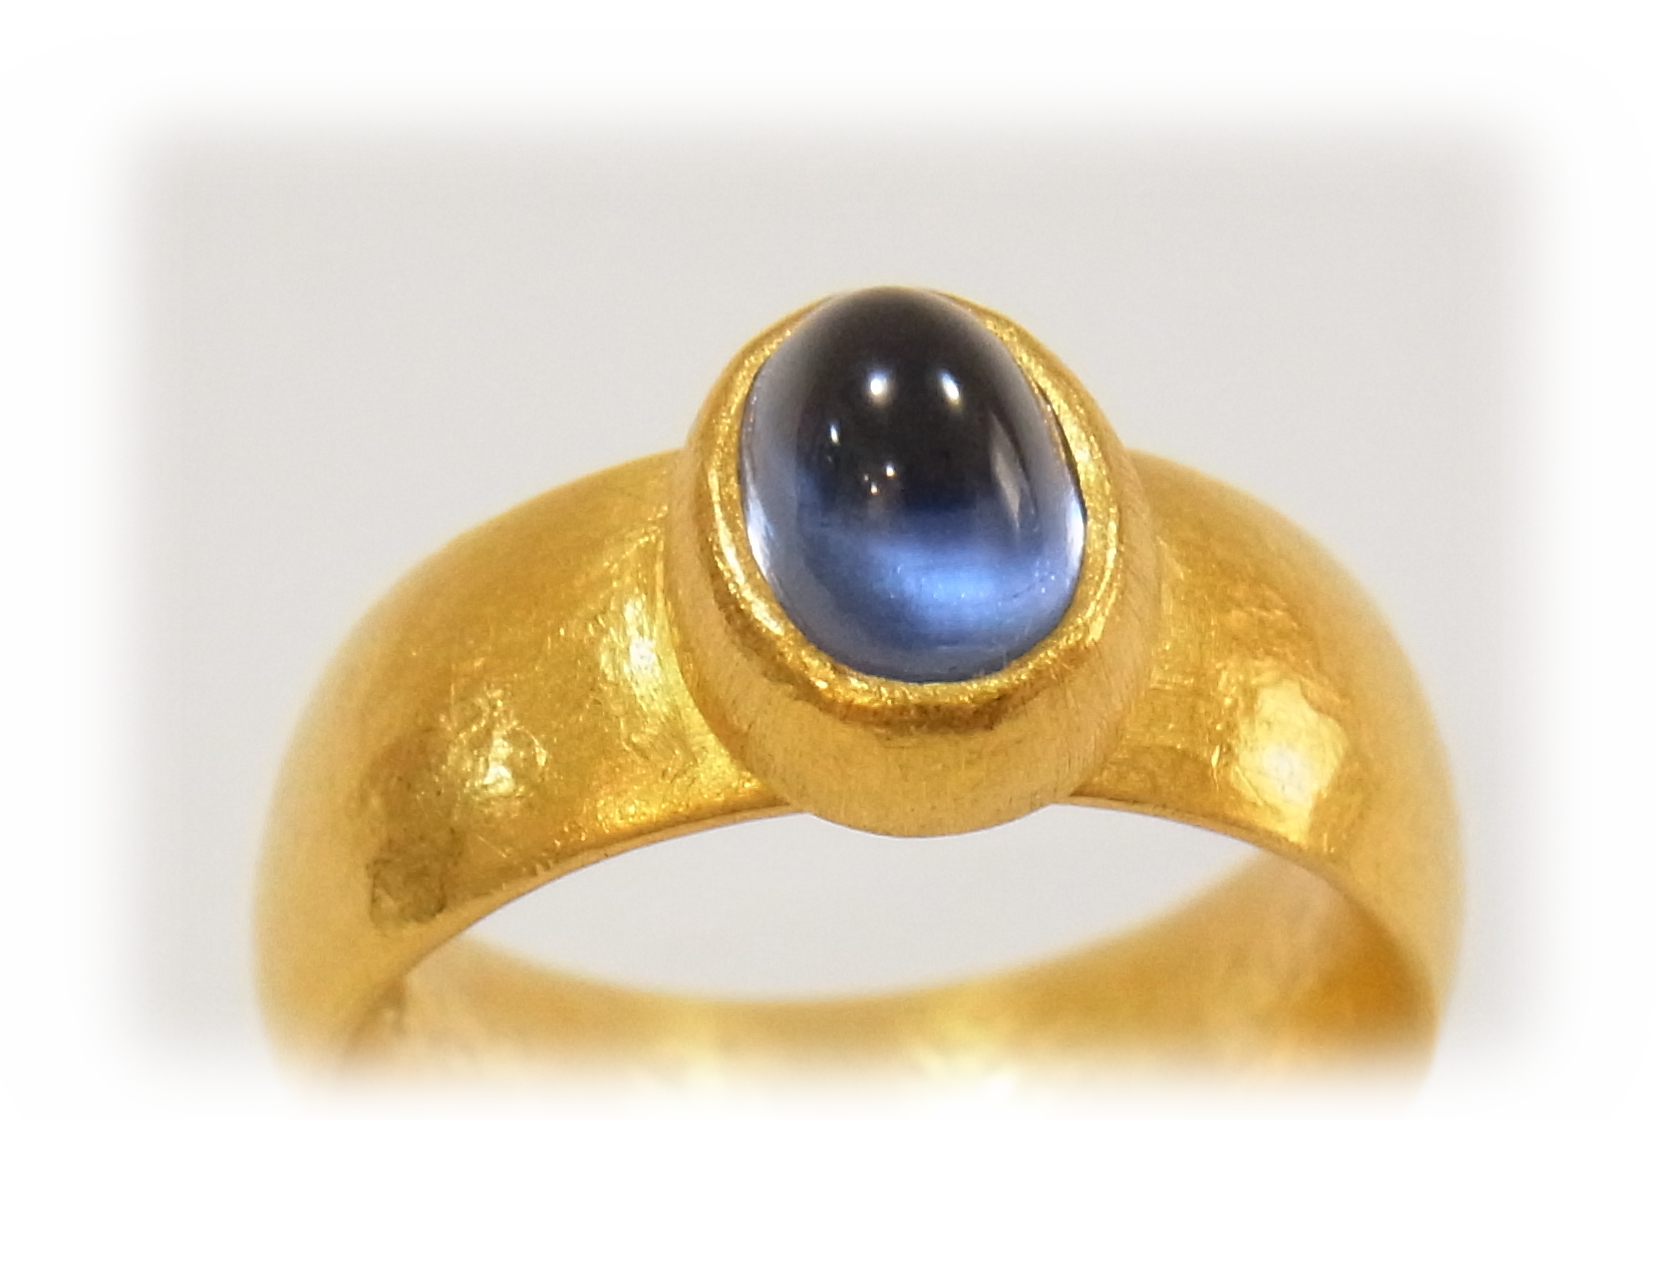 Handmade Jewelry by Nao goldwork: Cabochon blue Sapphire gold ring